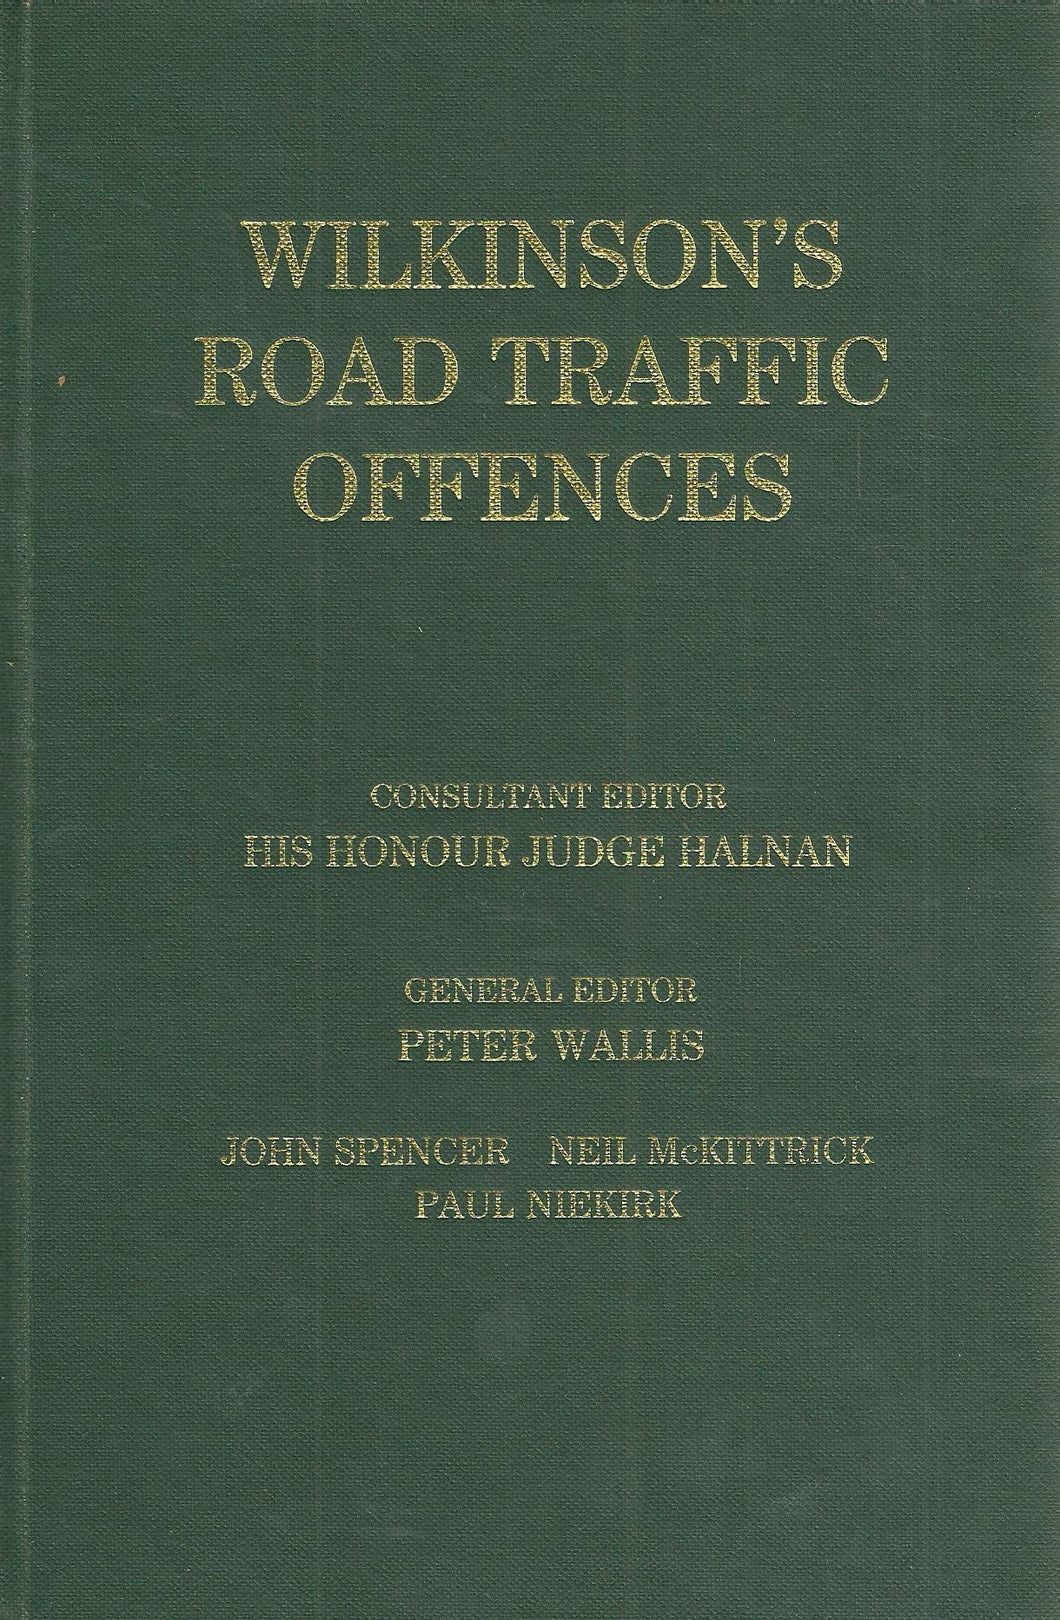 Wilkinson's Road Traffic Offences - Fourteenth (14th) Edition, Volume 1